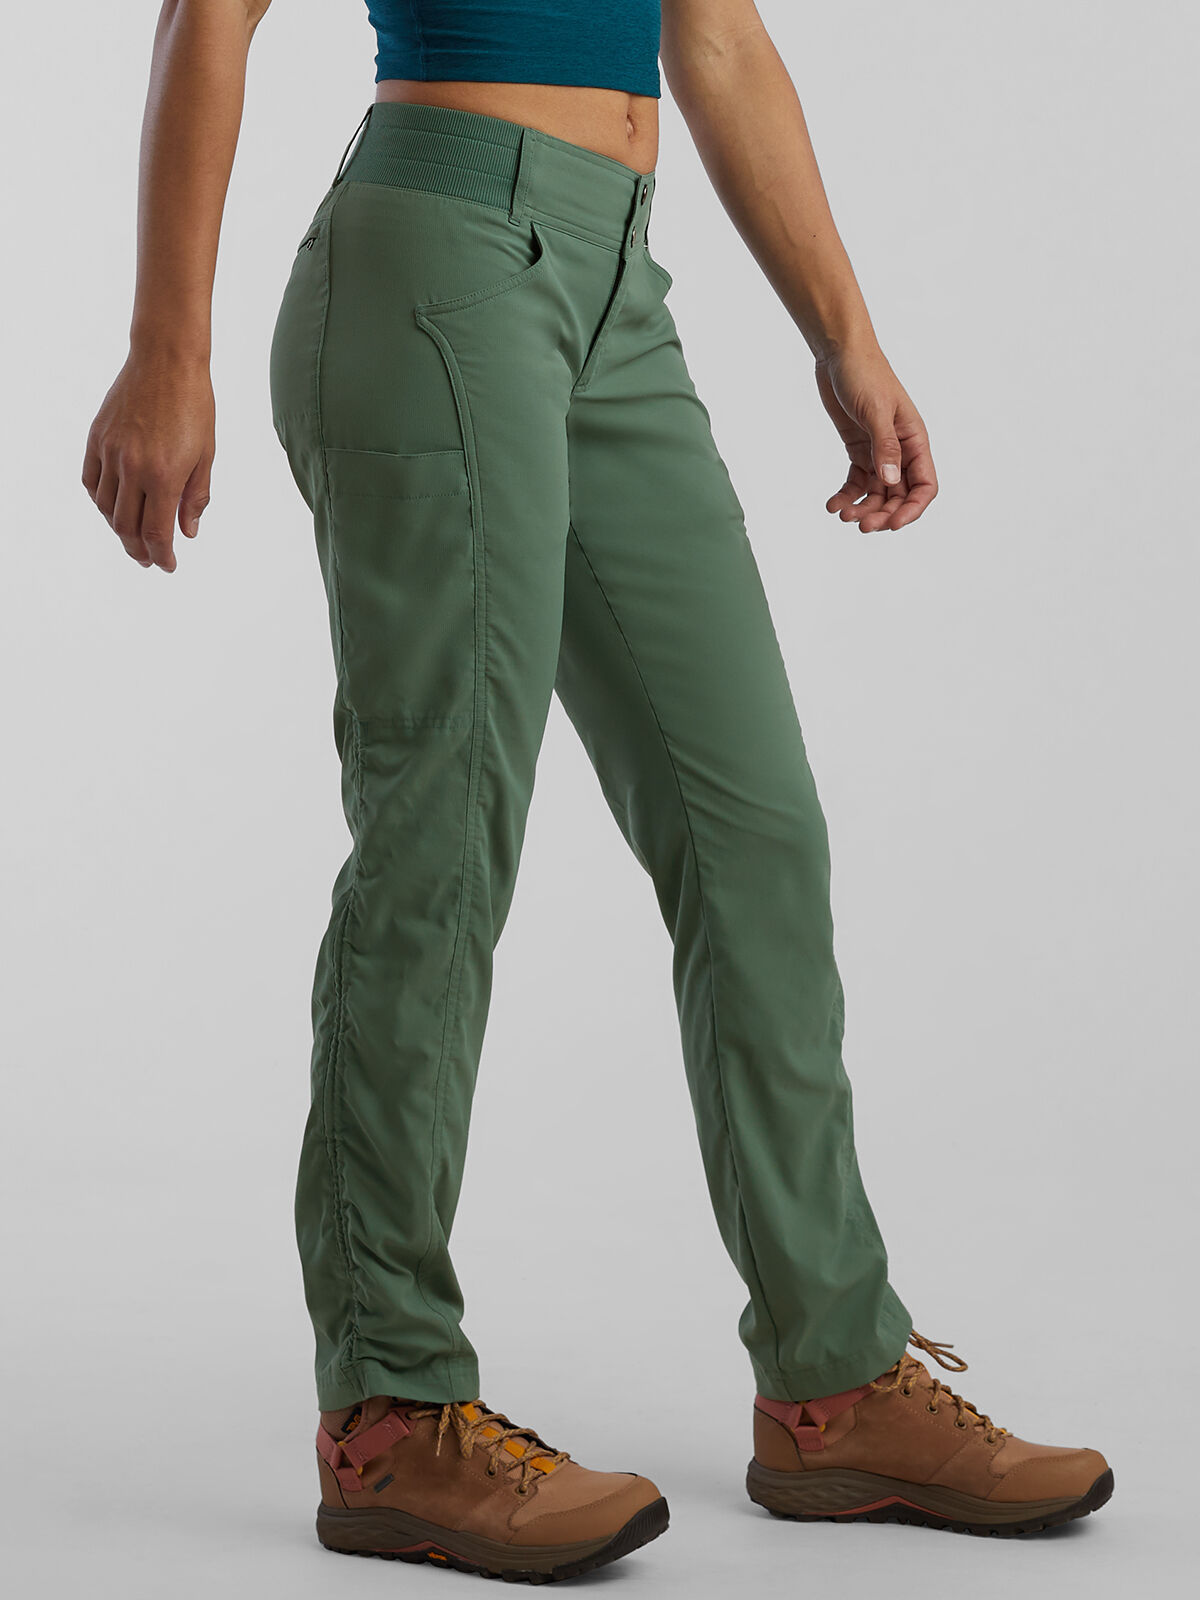 BVVU Mens Outdoor Hiking Cargo Pants with 9 Pockets Casual Work Cargo Pants  Quick Dry Water Resistant Travel Camping Trousers, Khaki, XX-Large :  Amazon.in: Clothing & Accessories